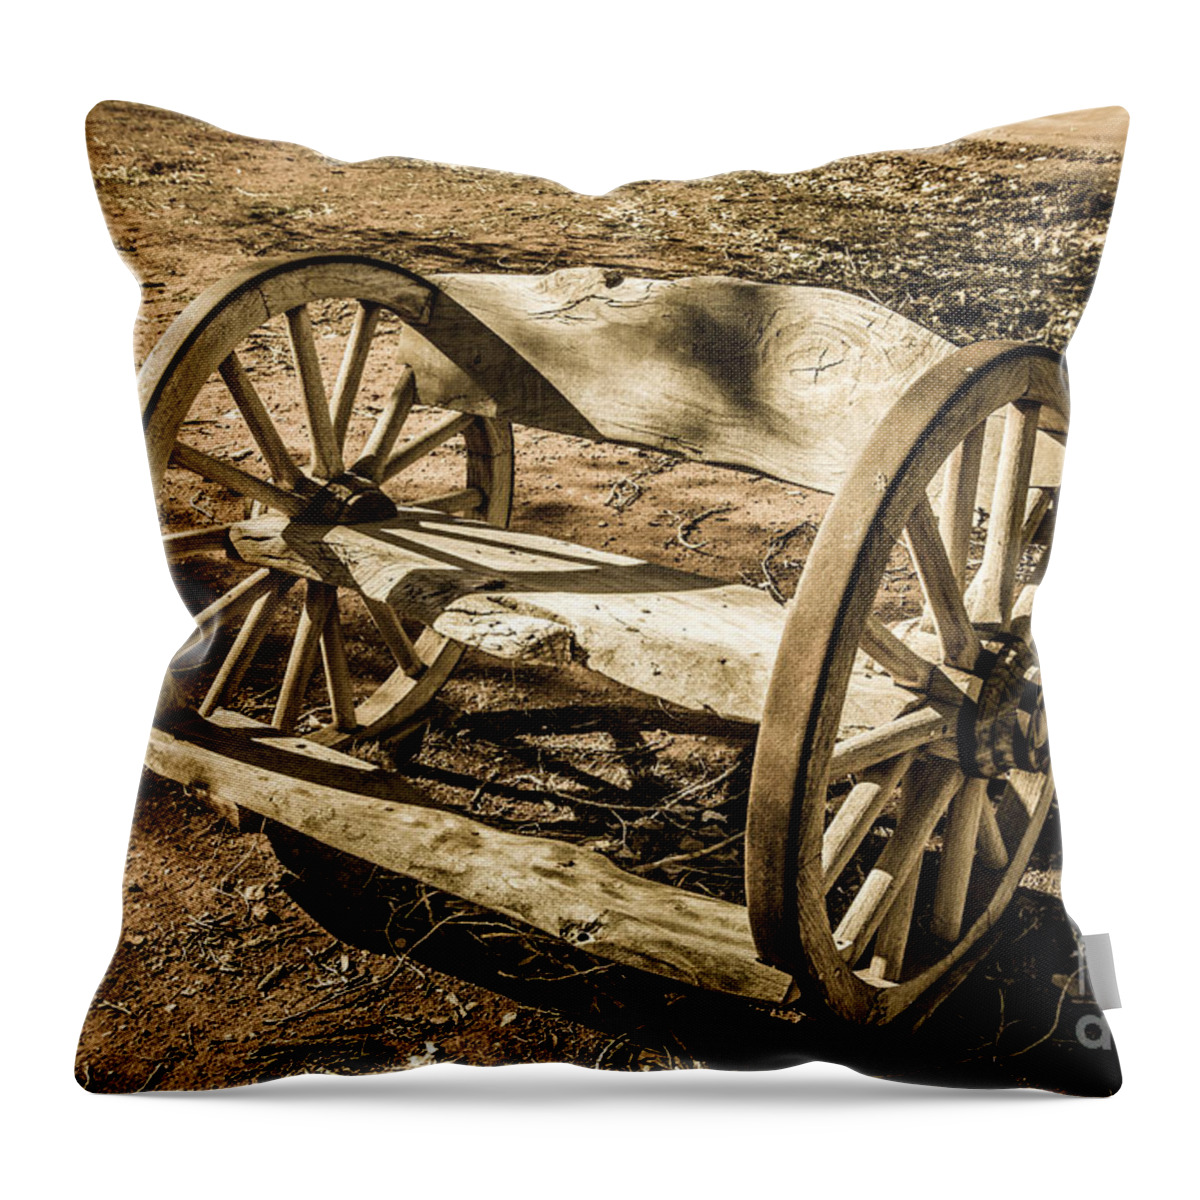 Bob And Nancy Kendrick Throw Pillow featuring the photograph Aged Bench by Bob and Nancy Kendrick